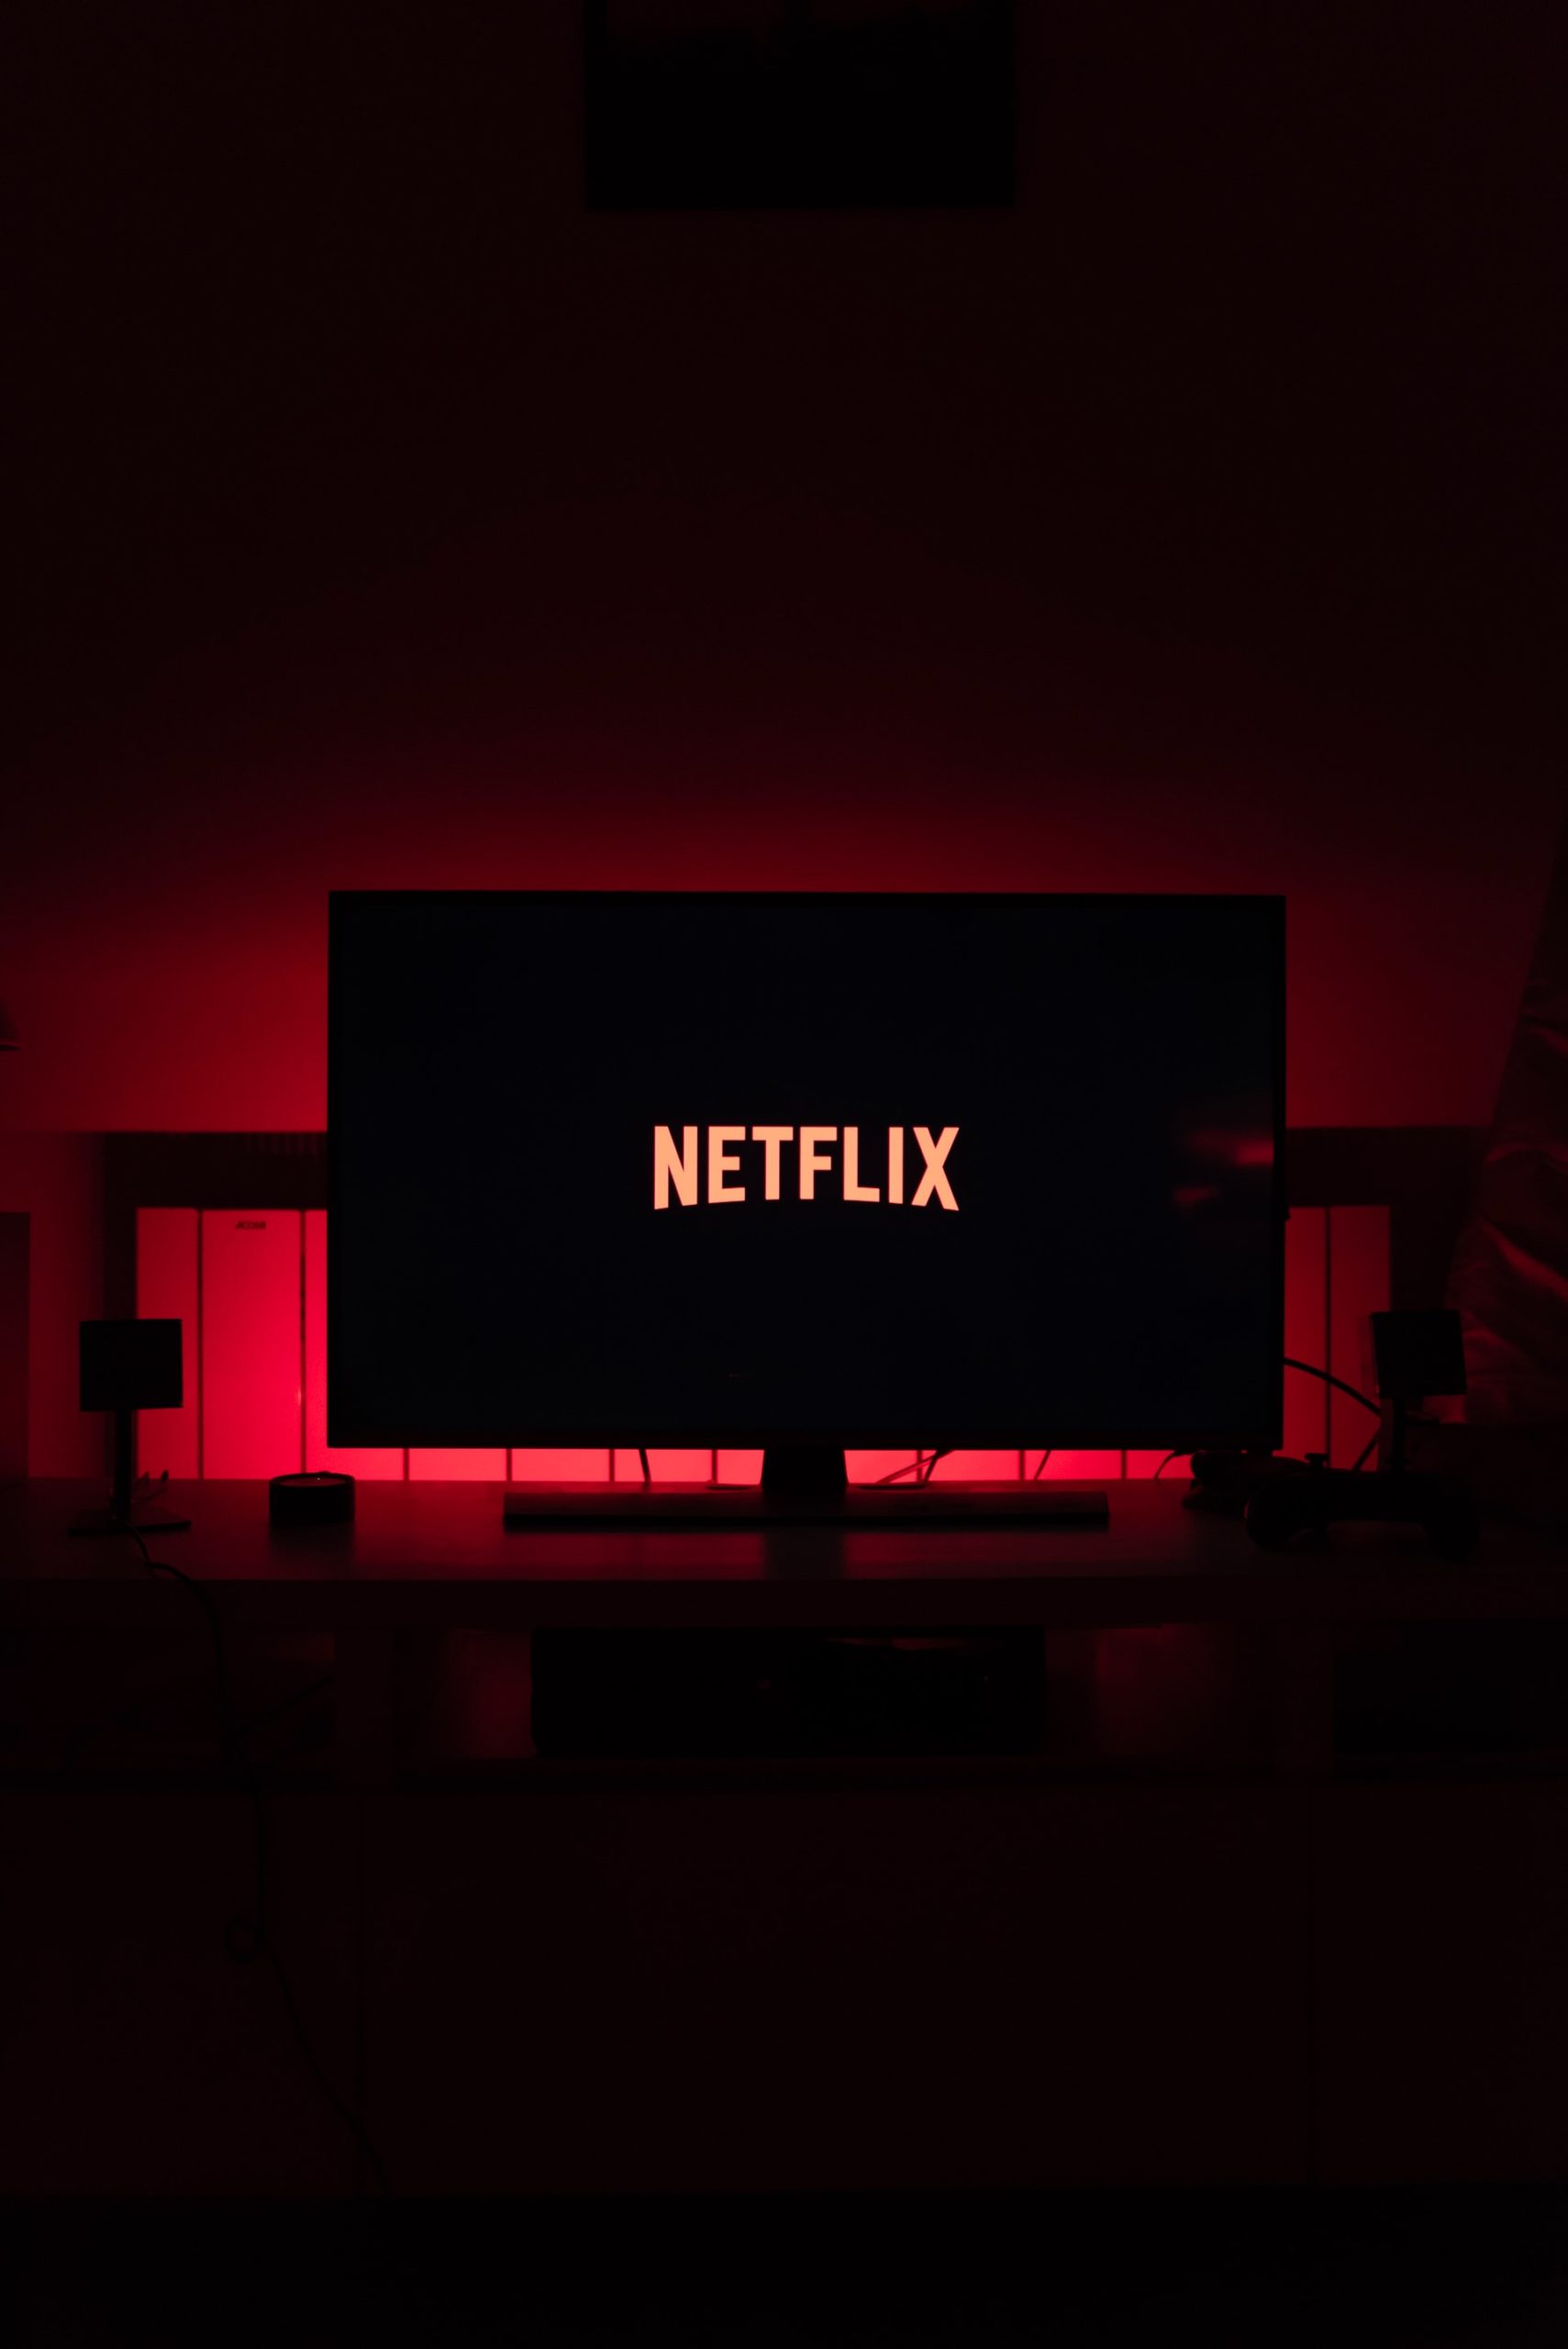 Netflix Raises Prices Of Standard and Premium Packages in the U.S